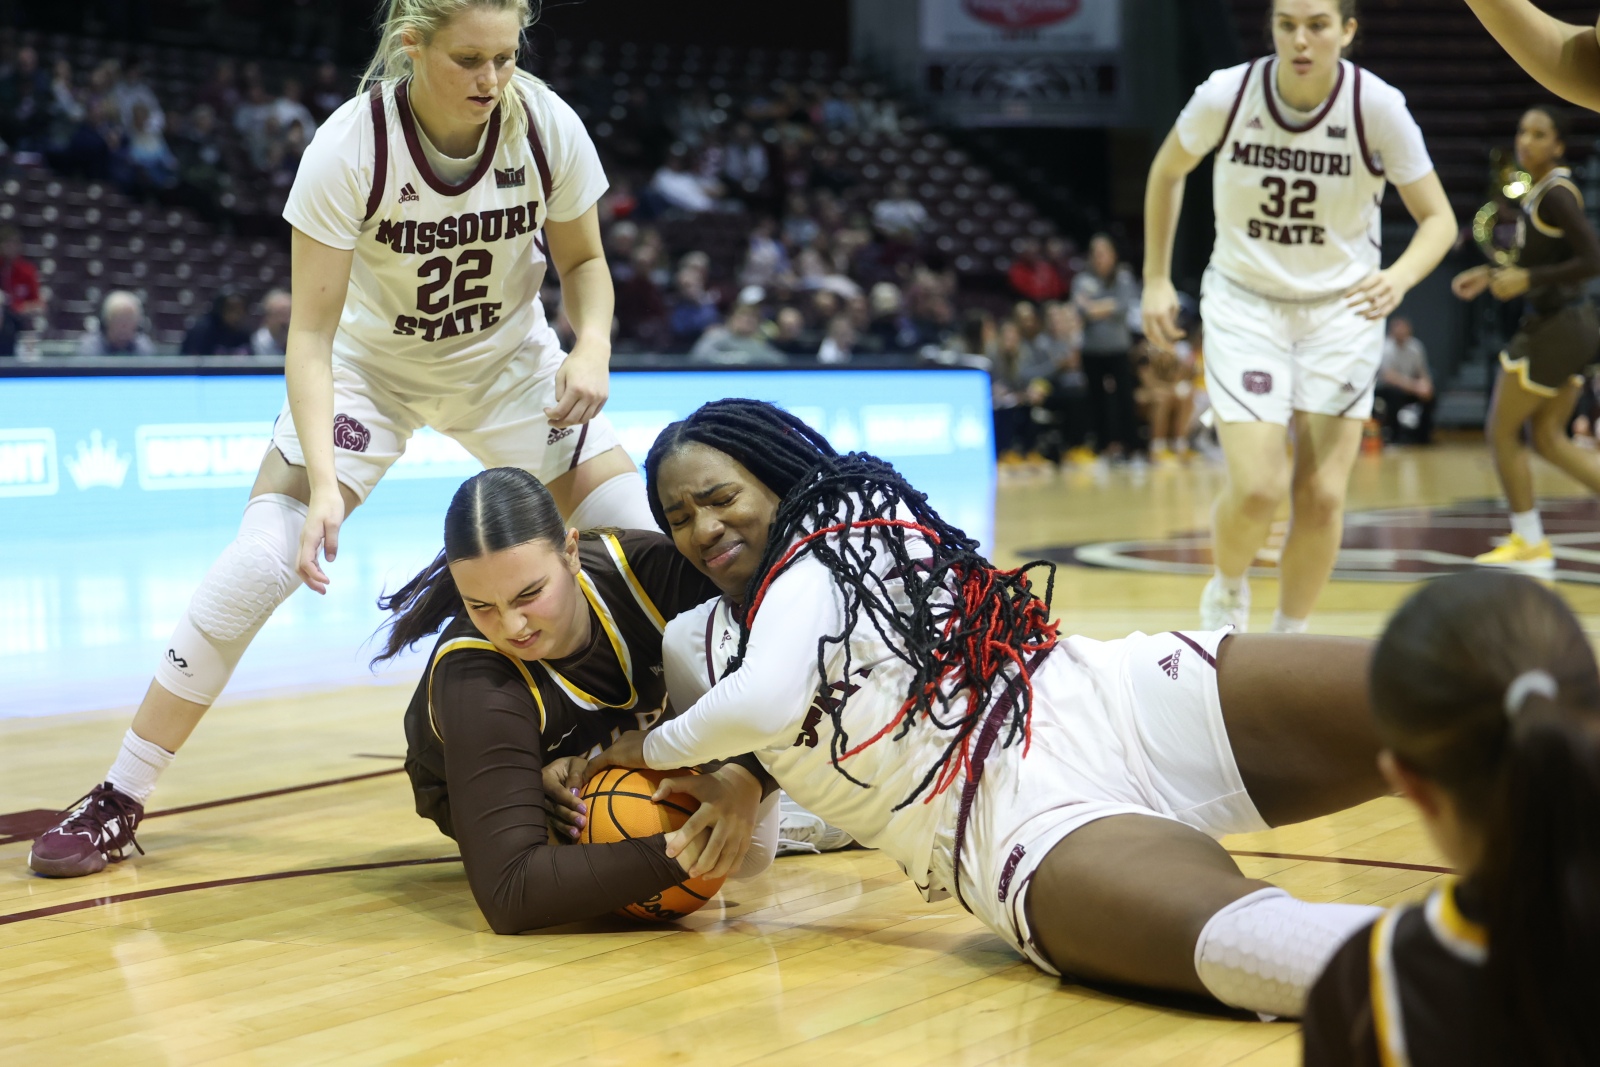 Missouri State’s Kennedy Taylor dives to the floor to battle for a loose ball during the Lady Bears’ 67-47 victory on Thursday night.